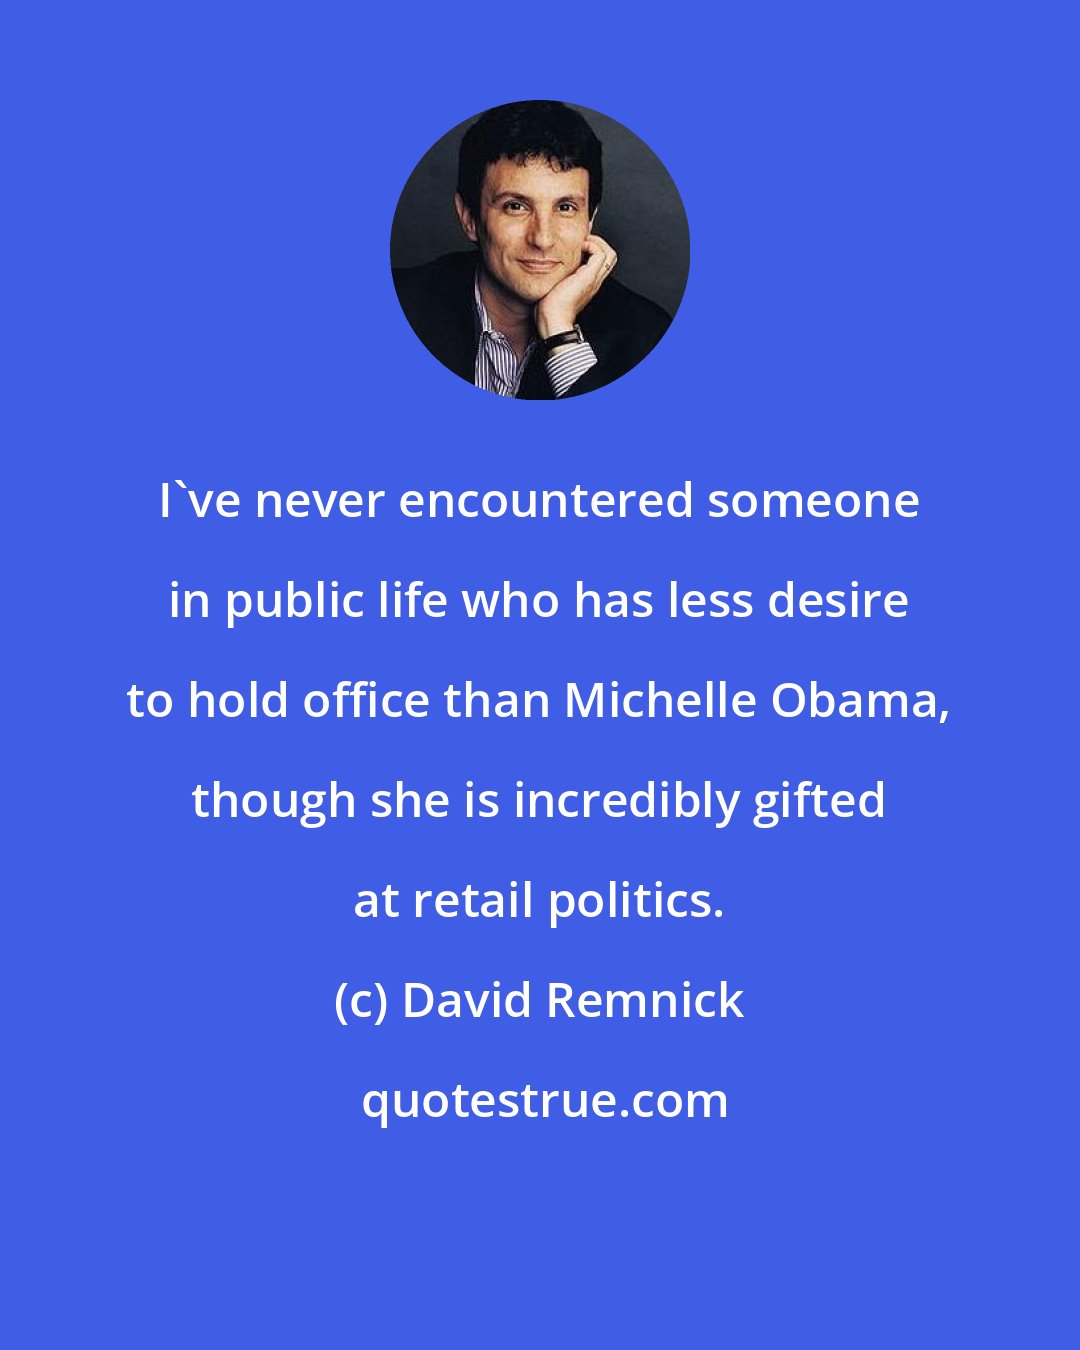 David Remnick: I've never encountered someone in public life who has less desire to hold office than Michelle Obama, though she is incredibly gifted at retail politics.